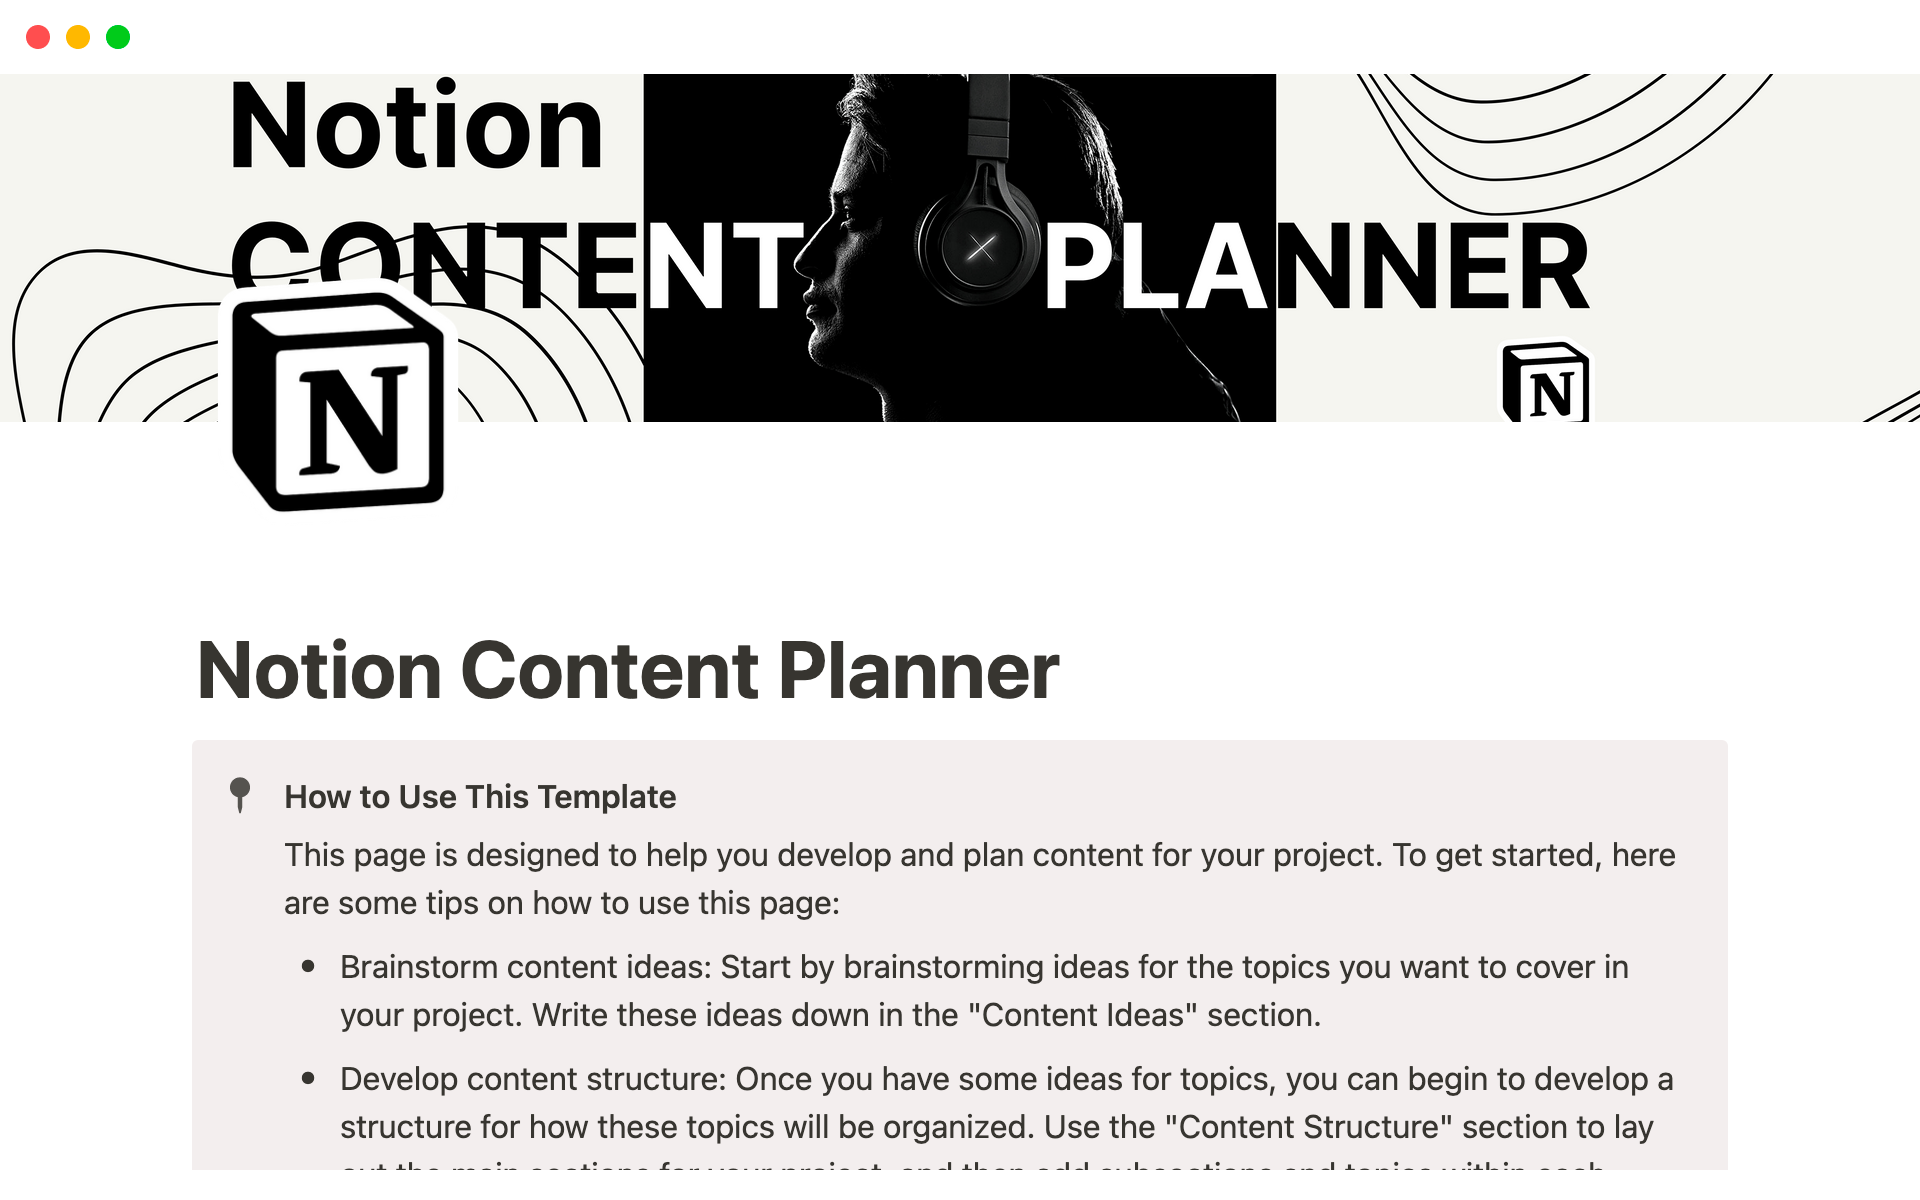 Notion Content Planner is the ideal tool to help you develop and plan content for your project. 